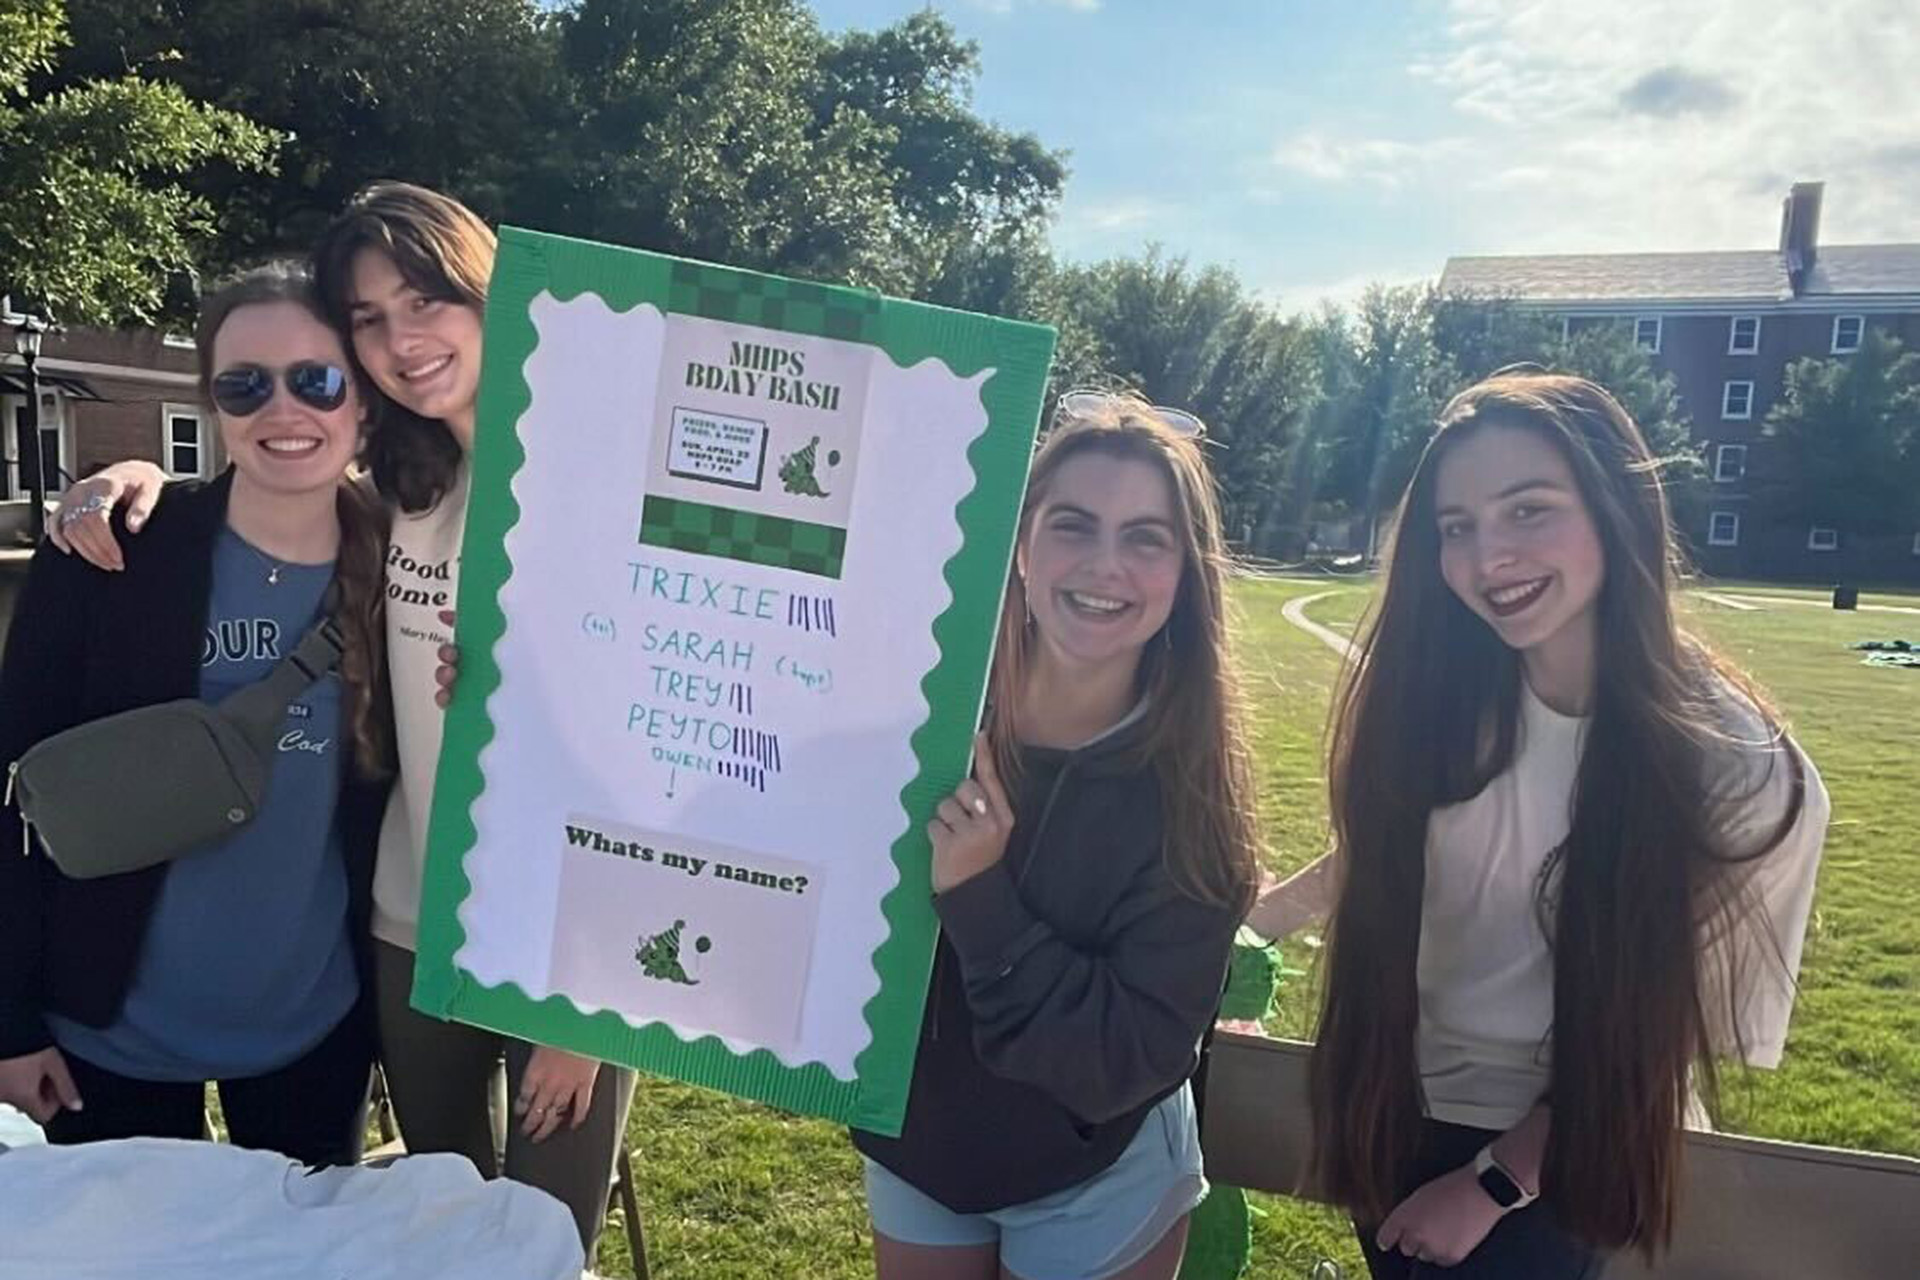 Four students holding green and white poster outside for MHPS Birthday Bash